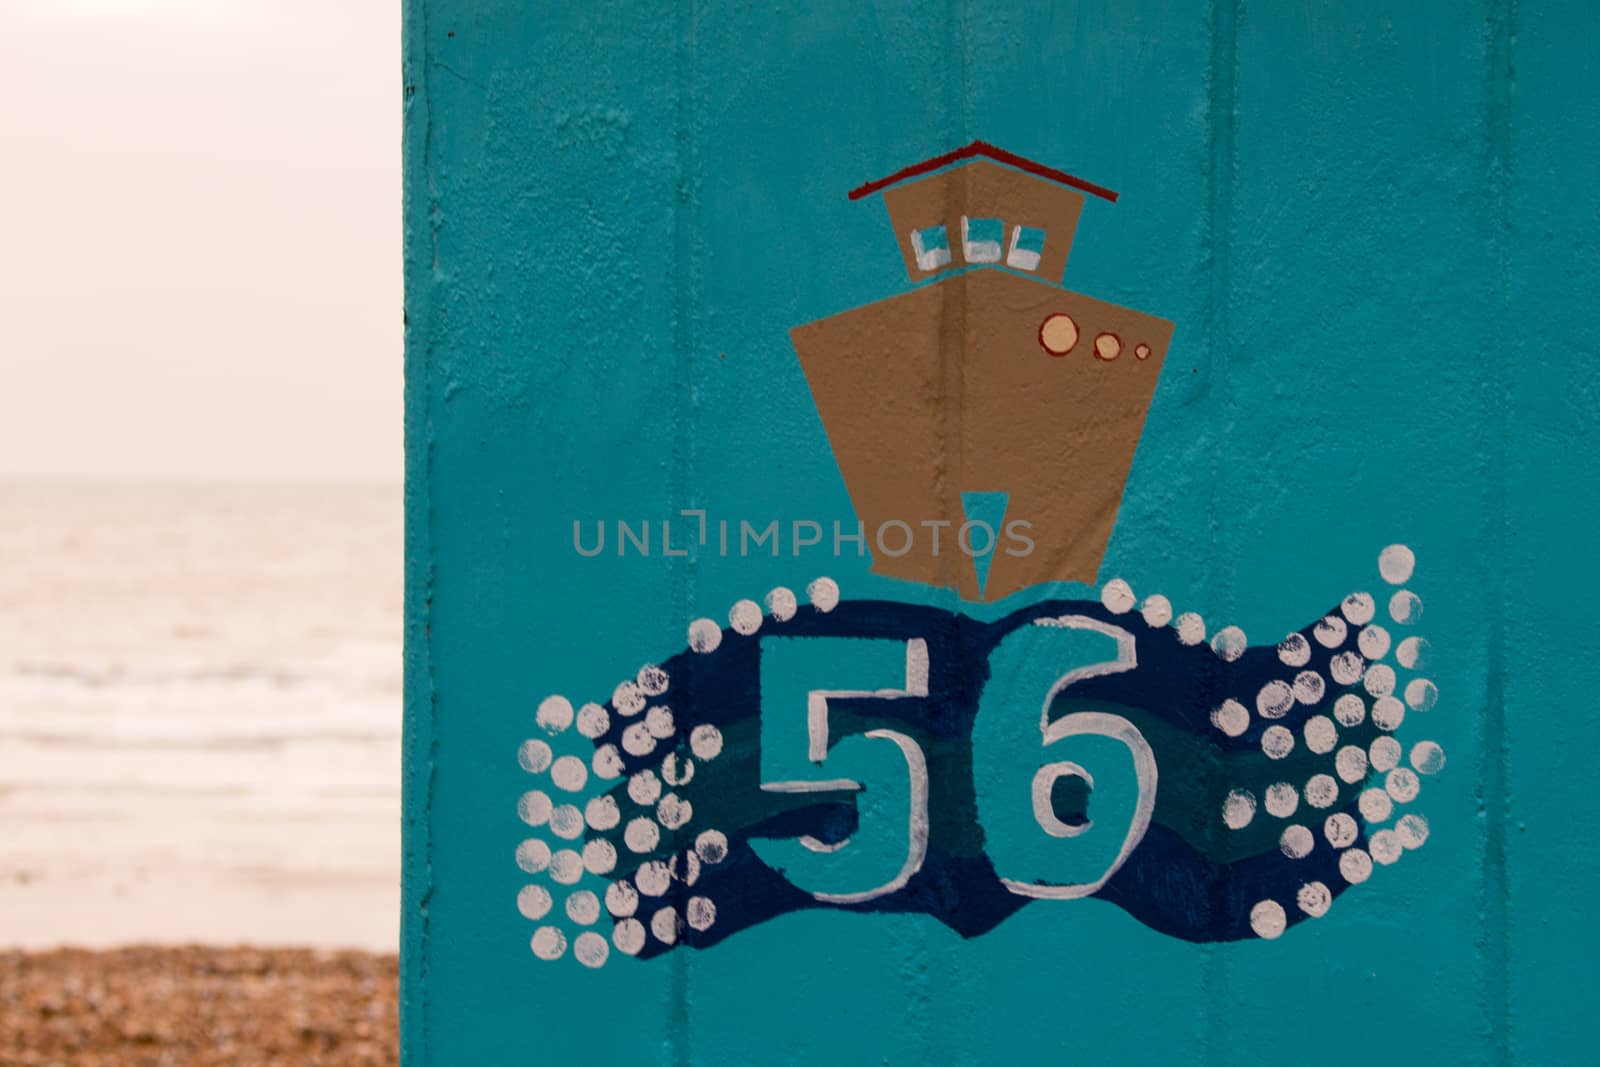 Brown painted boat on on a blue english beach hut with the number 56 and the beach and sea in the background